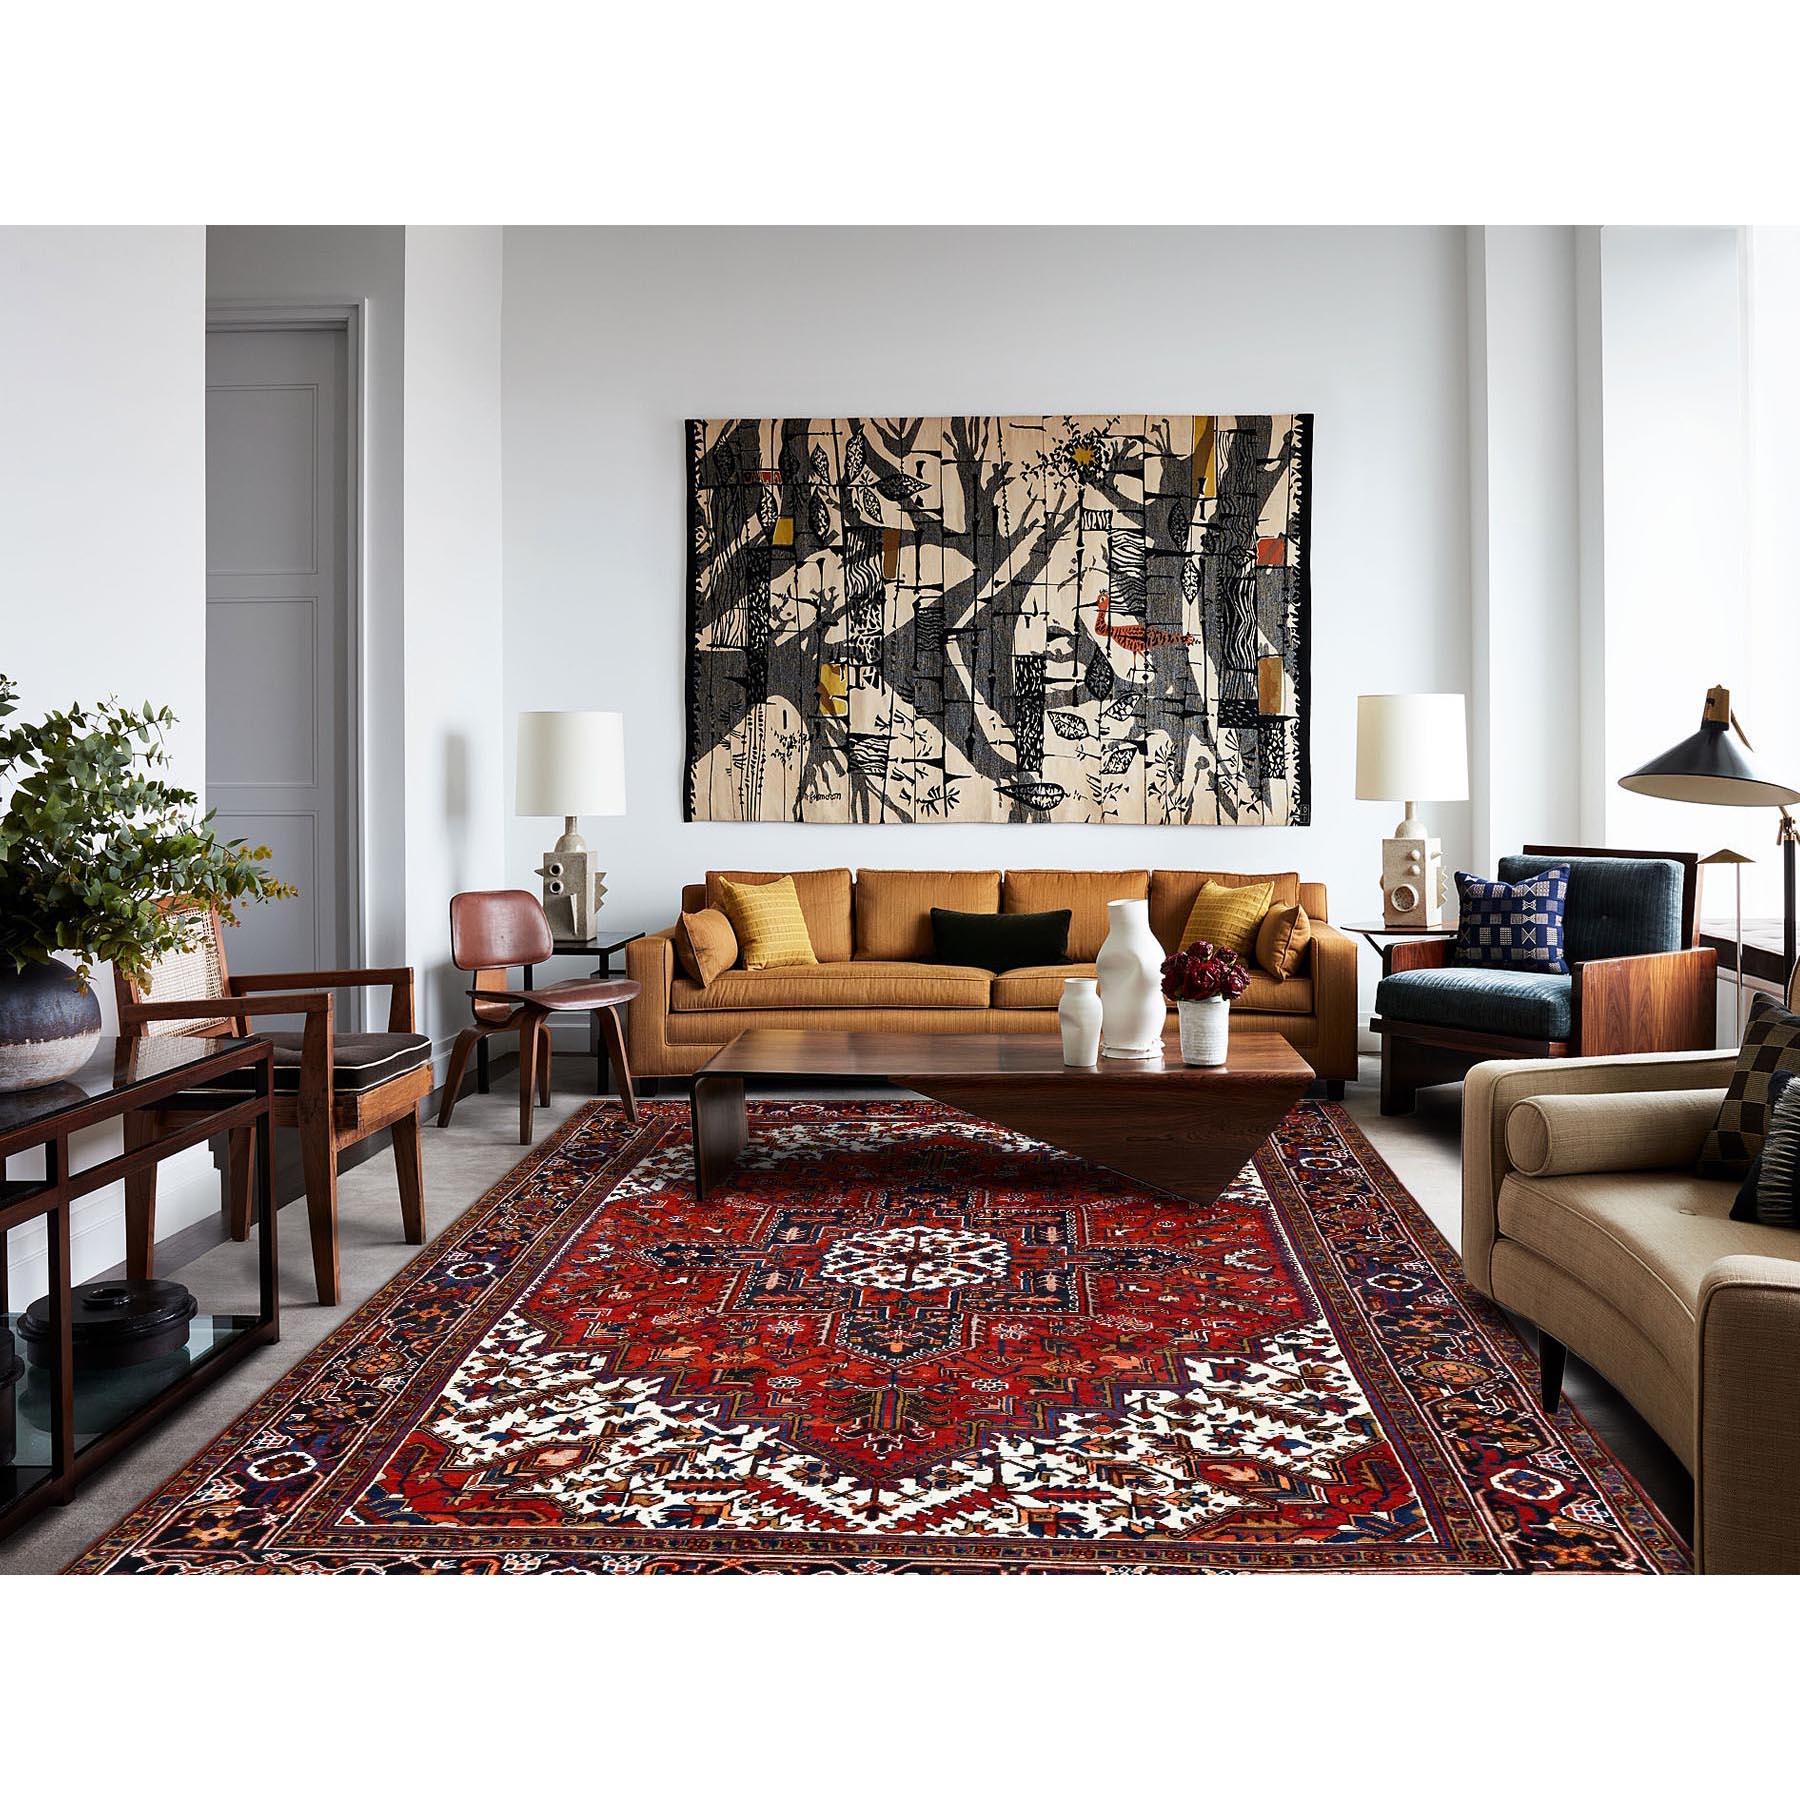 This fabulous Hand-Knotted carpet has been created and designed for extra strength and durability. This rug has been handcrafted for weeks in the traditional method that is used to make
Exact Rug Size in Feet and Inches : 8'5